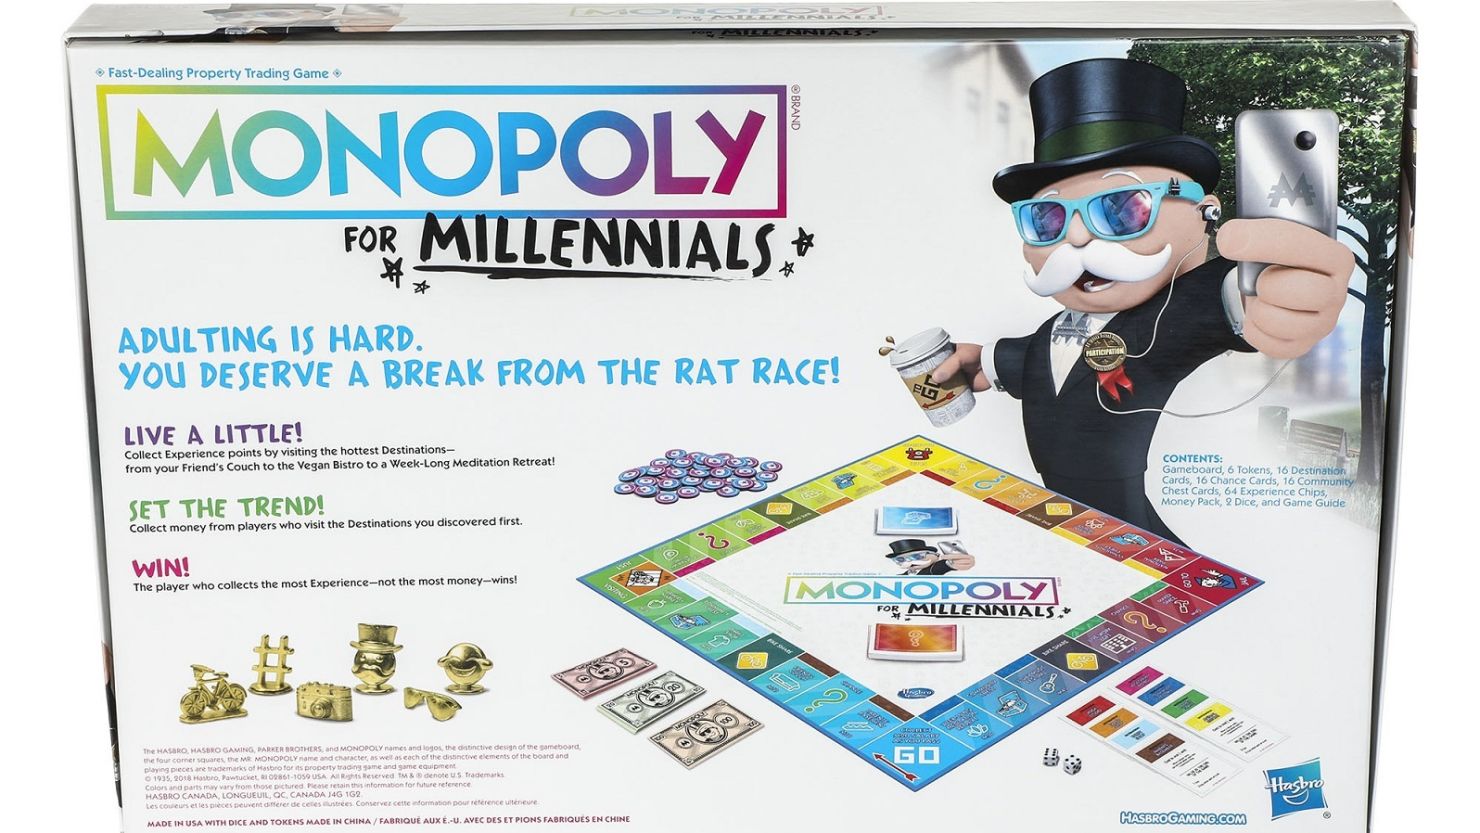 Monopoly for Millennials allows young fans to take "a break from the rat race," Hasbro says